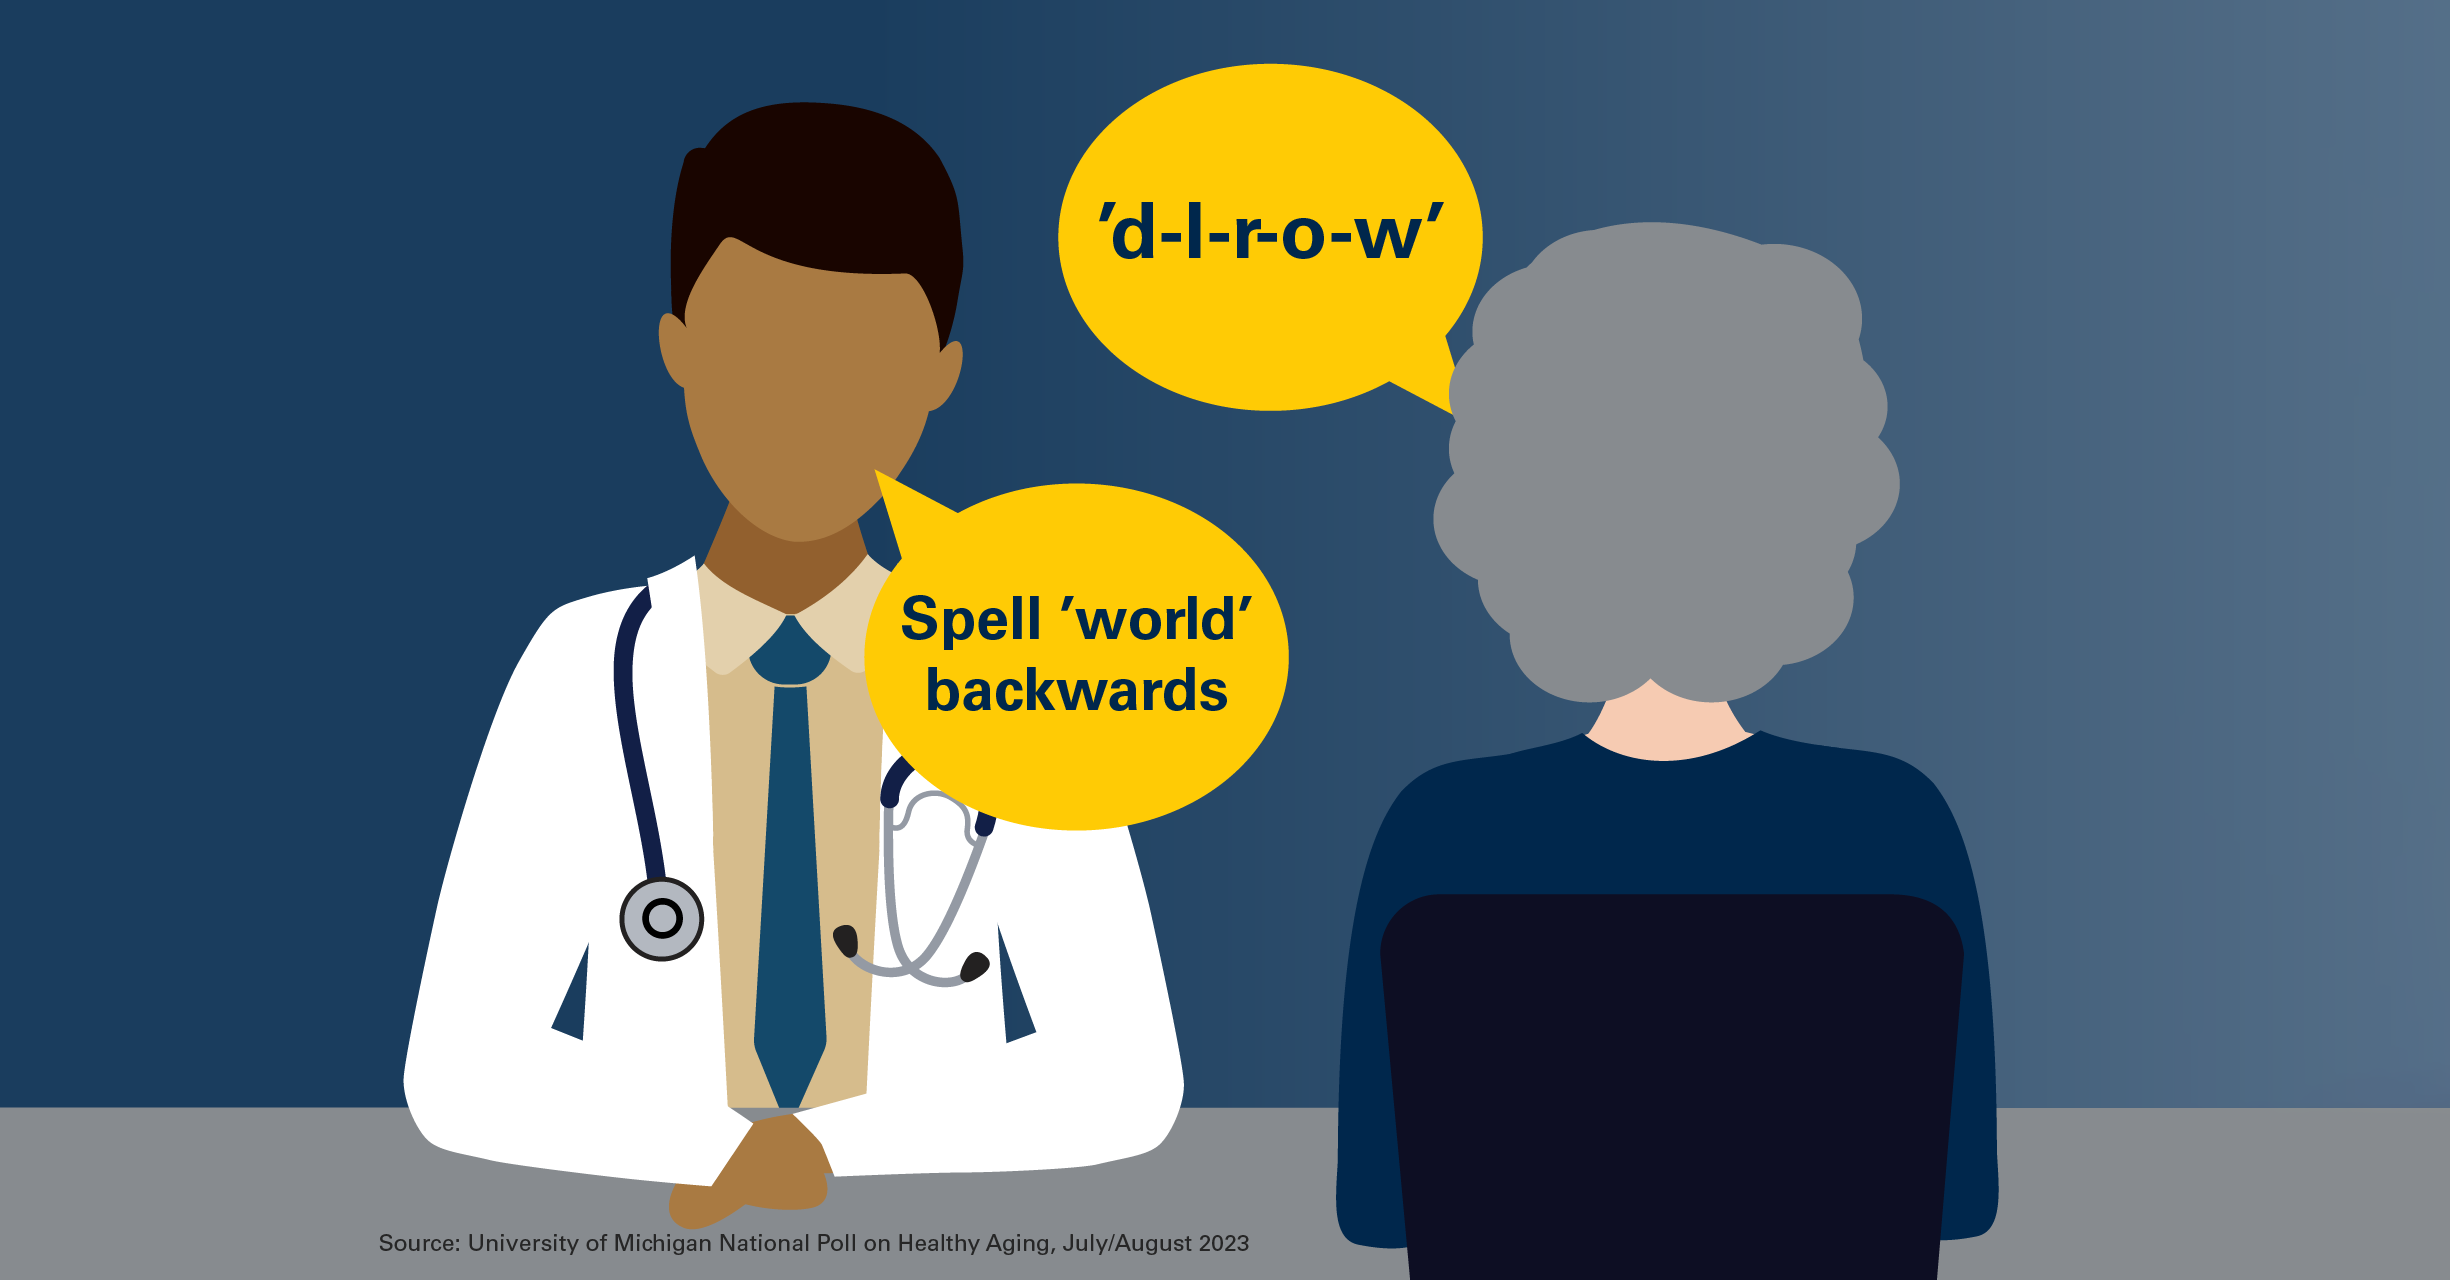 Graphic of a doctor asking a patient to spell the word "world" backwards.